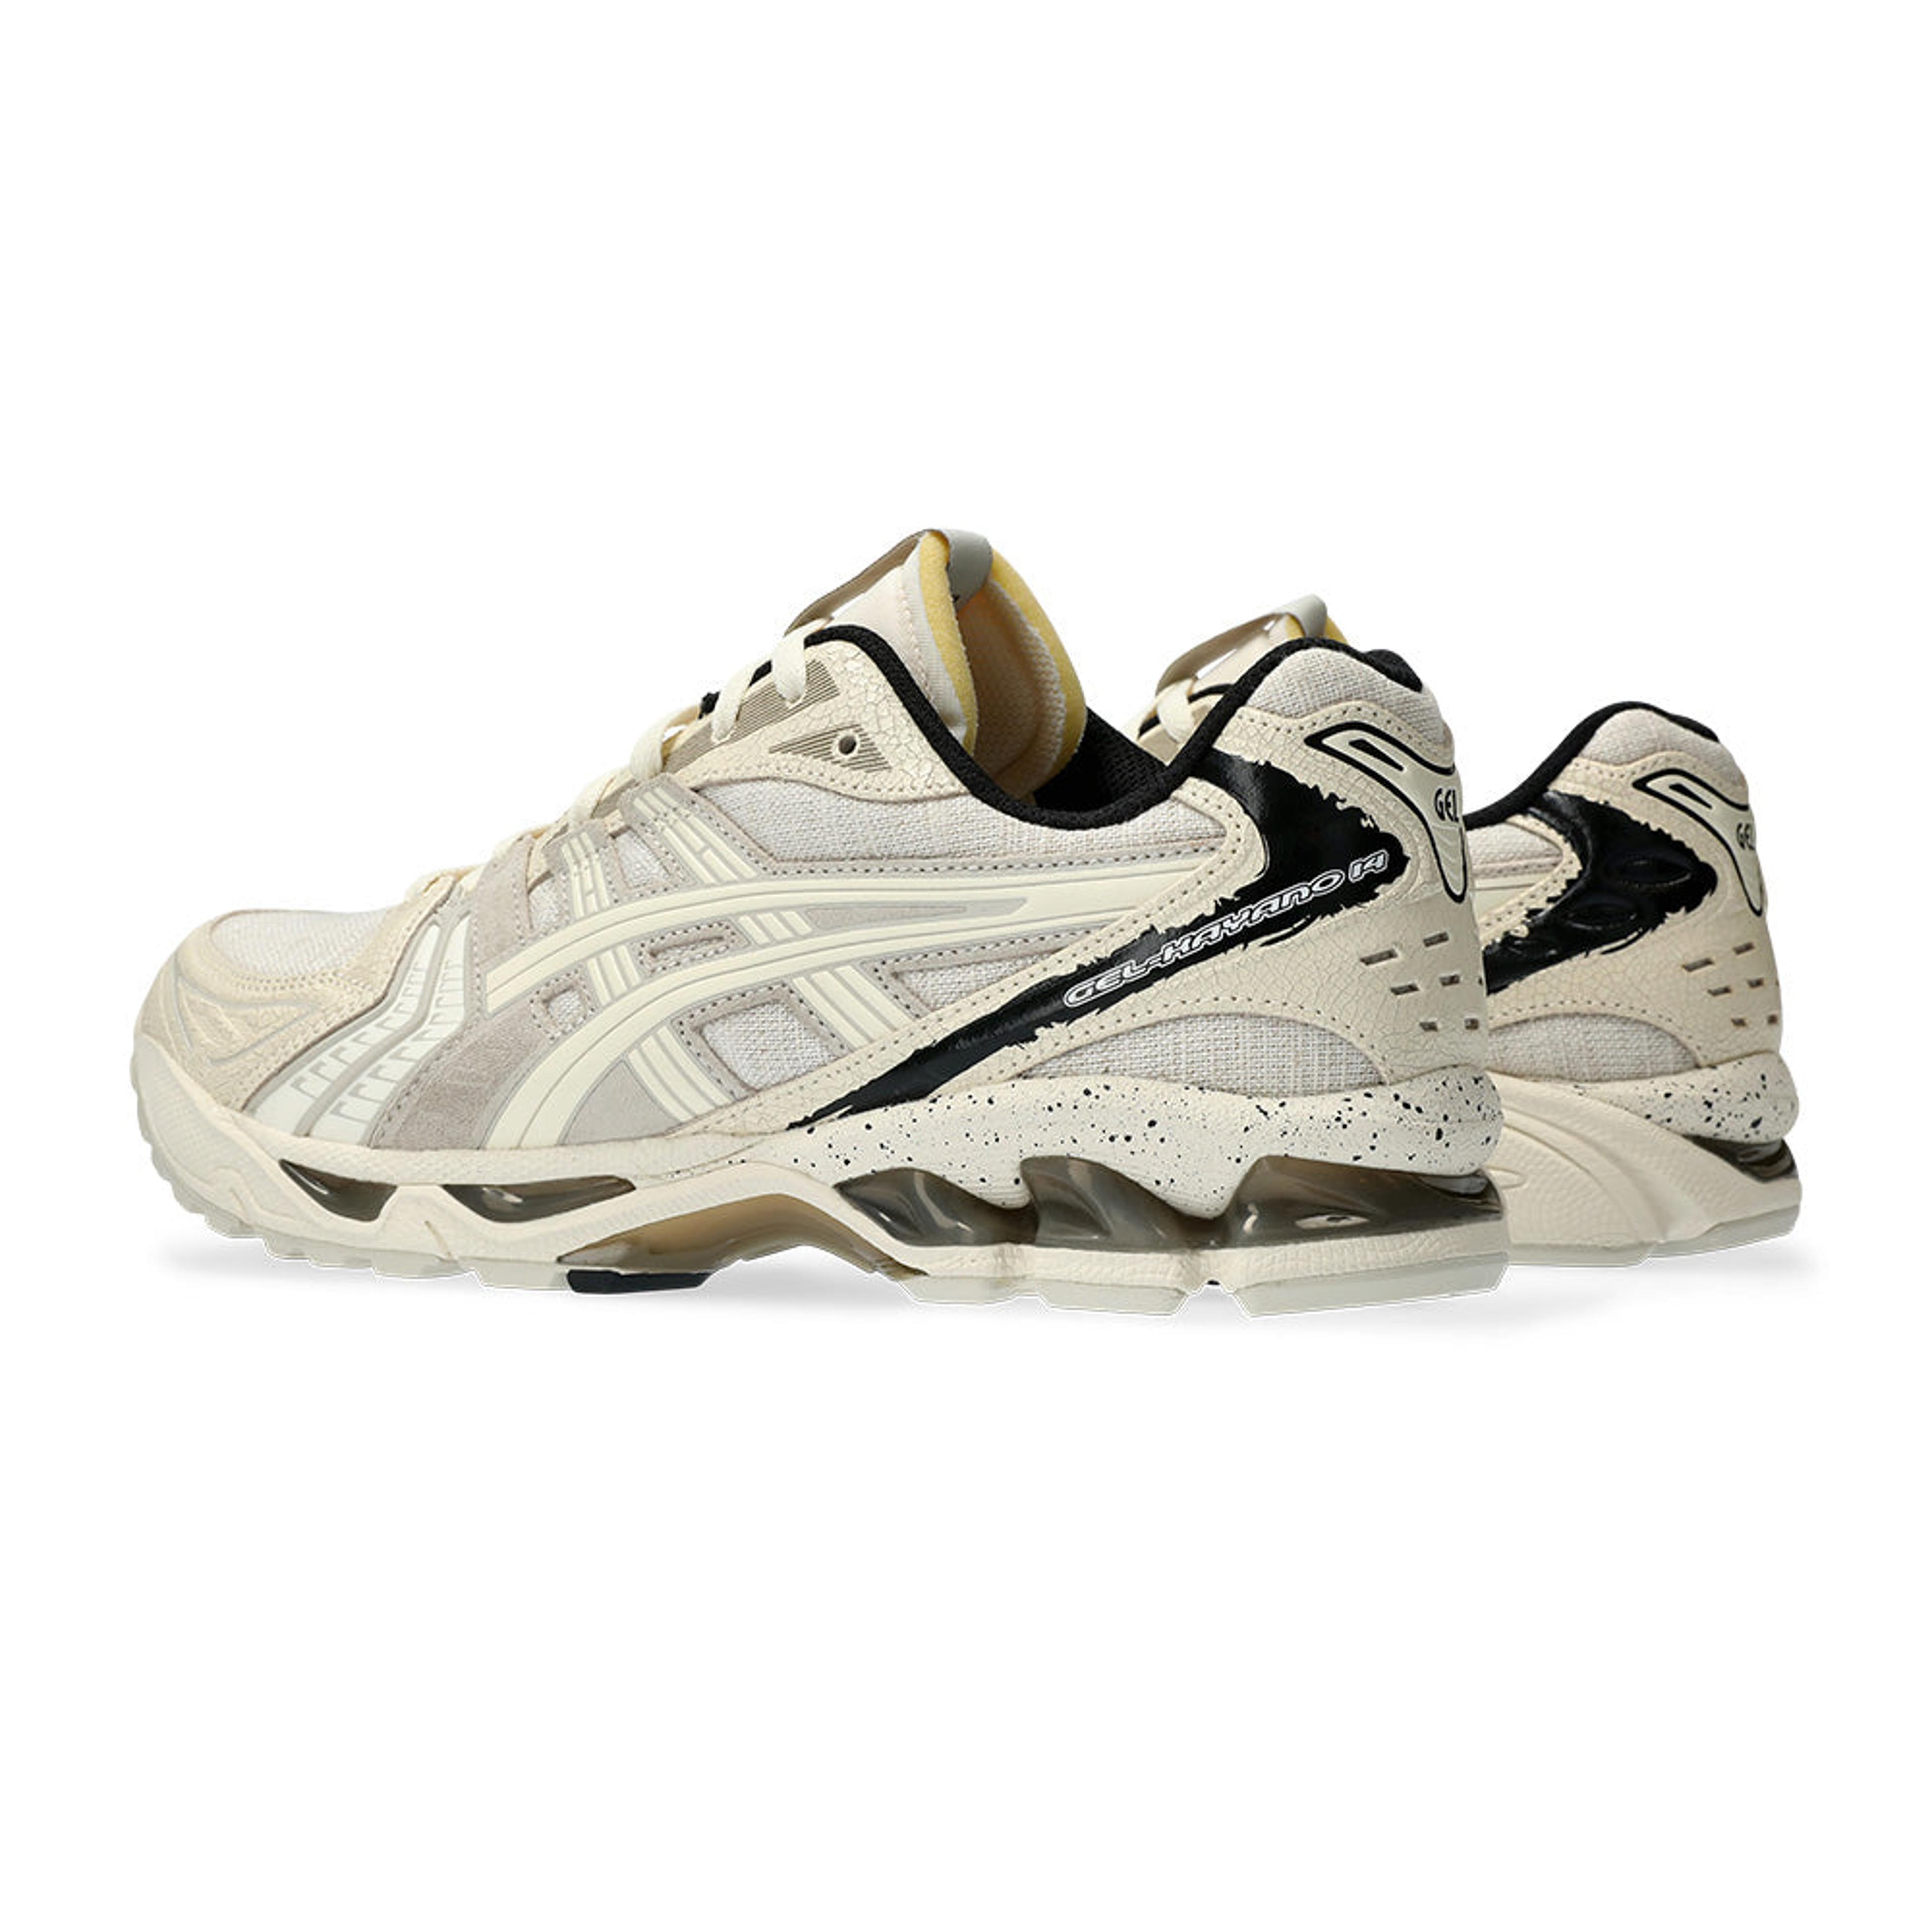 Alternate View 2 of Asics Gel-Kayano 14 "Imperfection" Pack